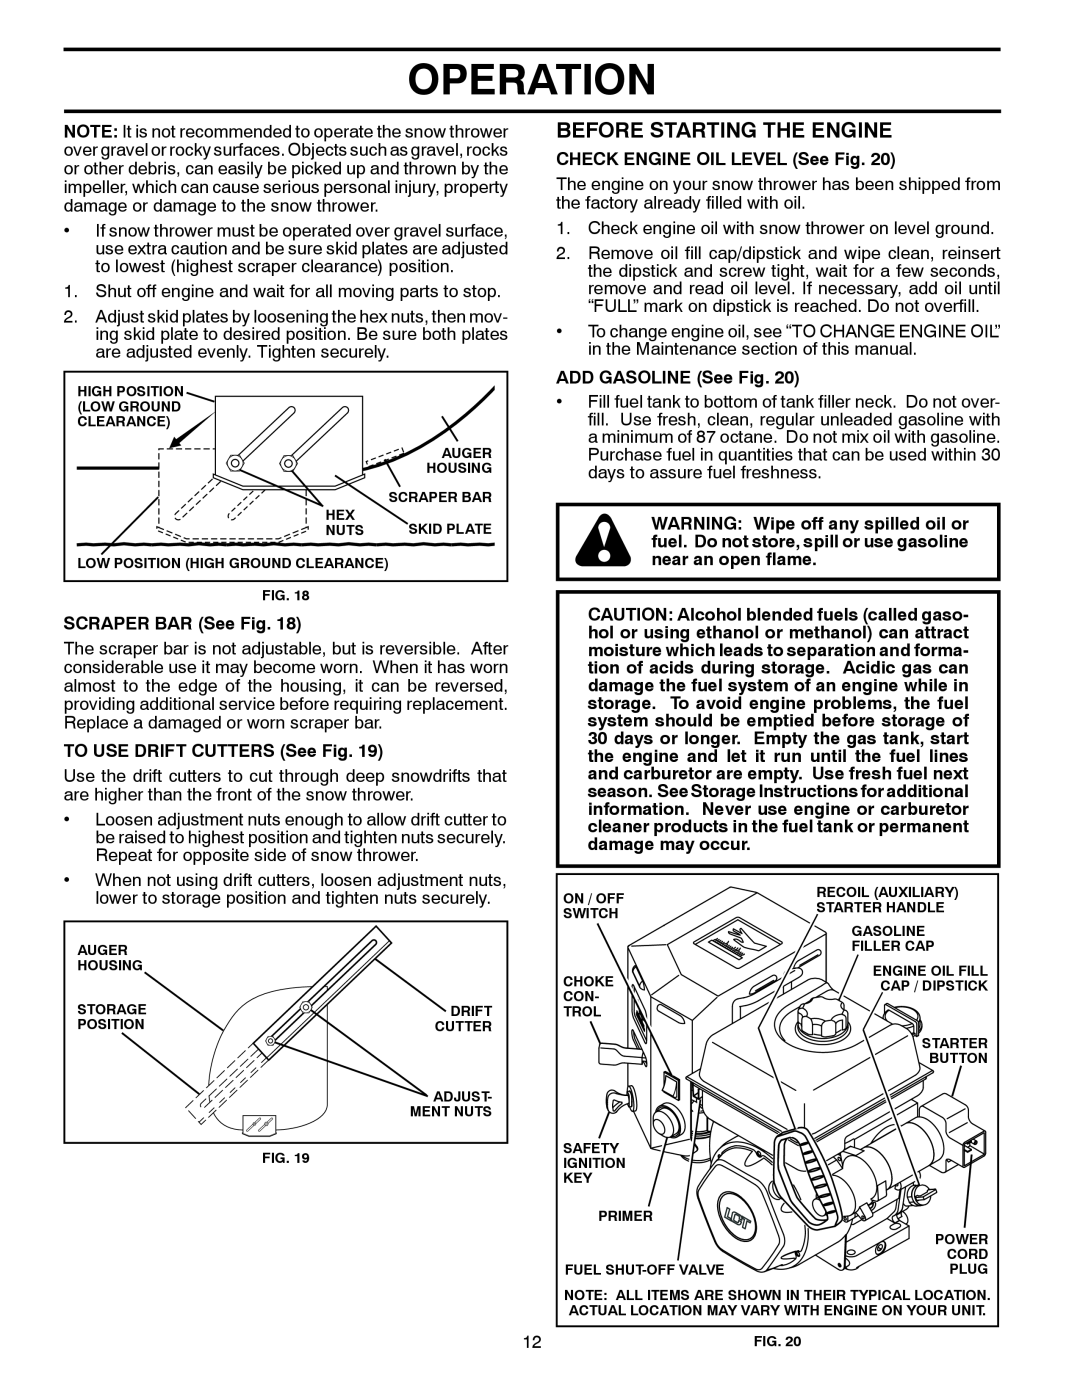 Poulan 435548, 96198002901 Before Starting The Engine, Operation, SCRAPER BAR See Fig, TO USE DRIFT CUTTERS See Fig 